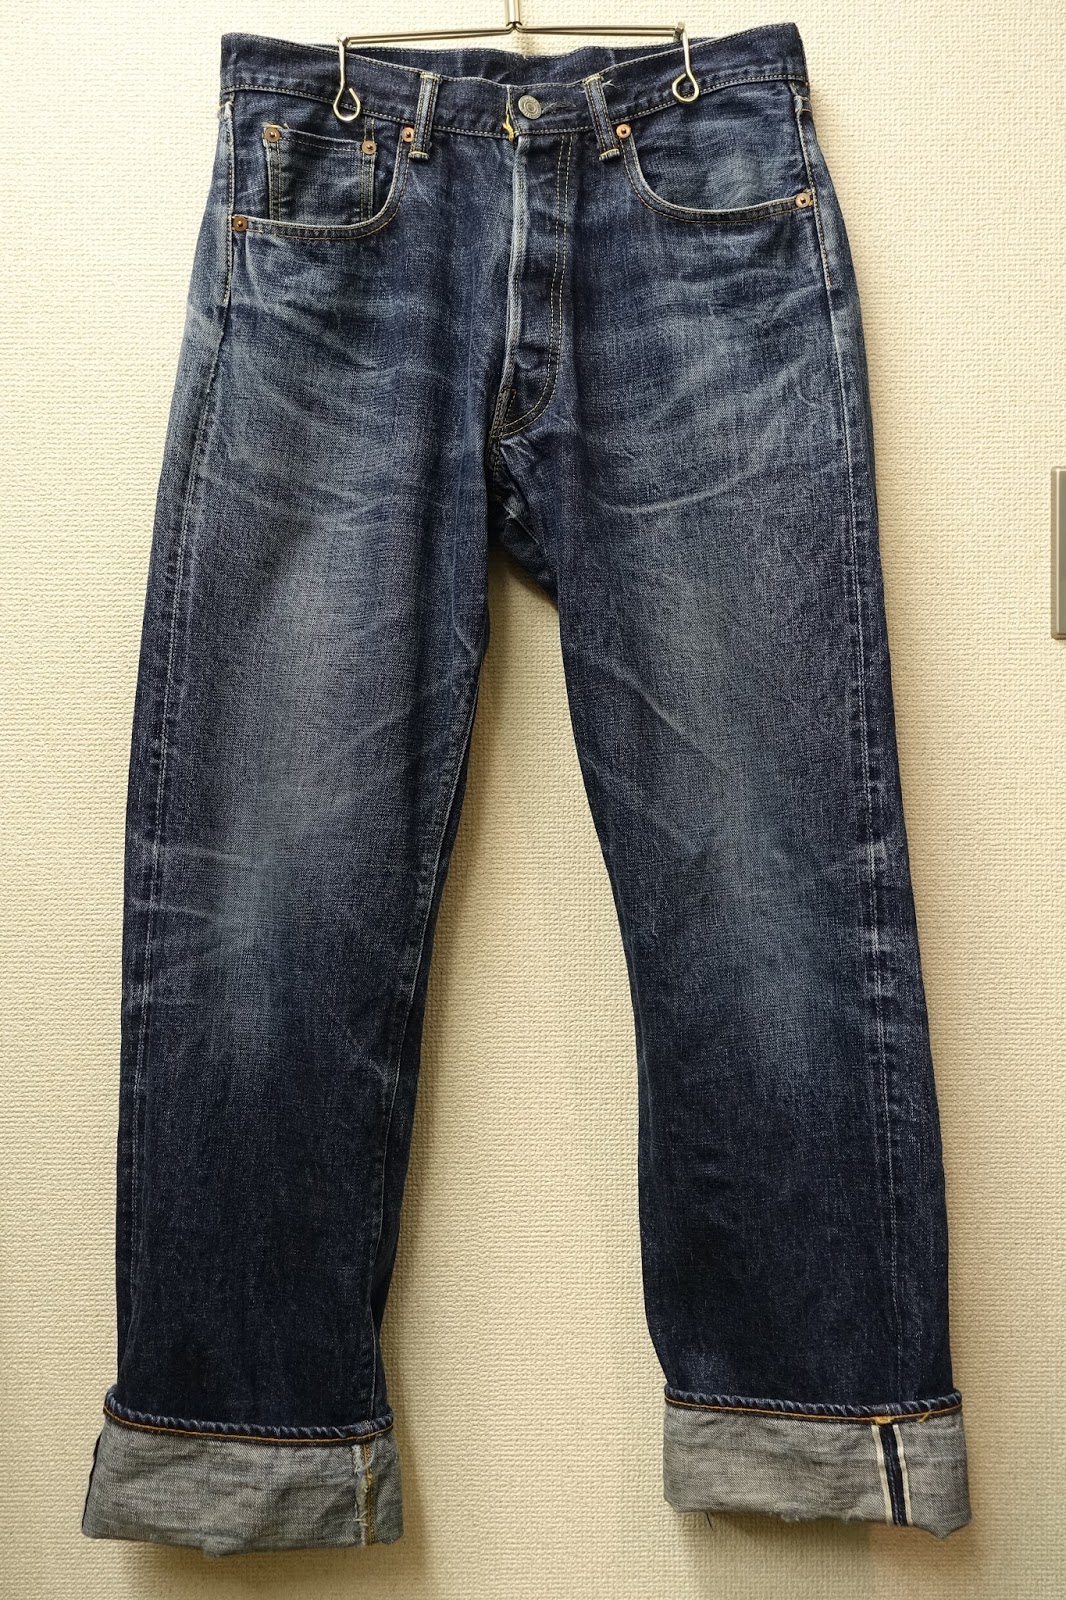 Dempsey Clothing: TCB jeans 50's